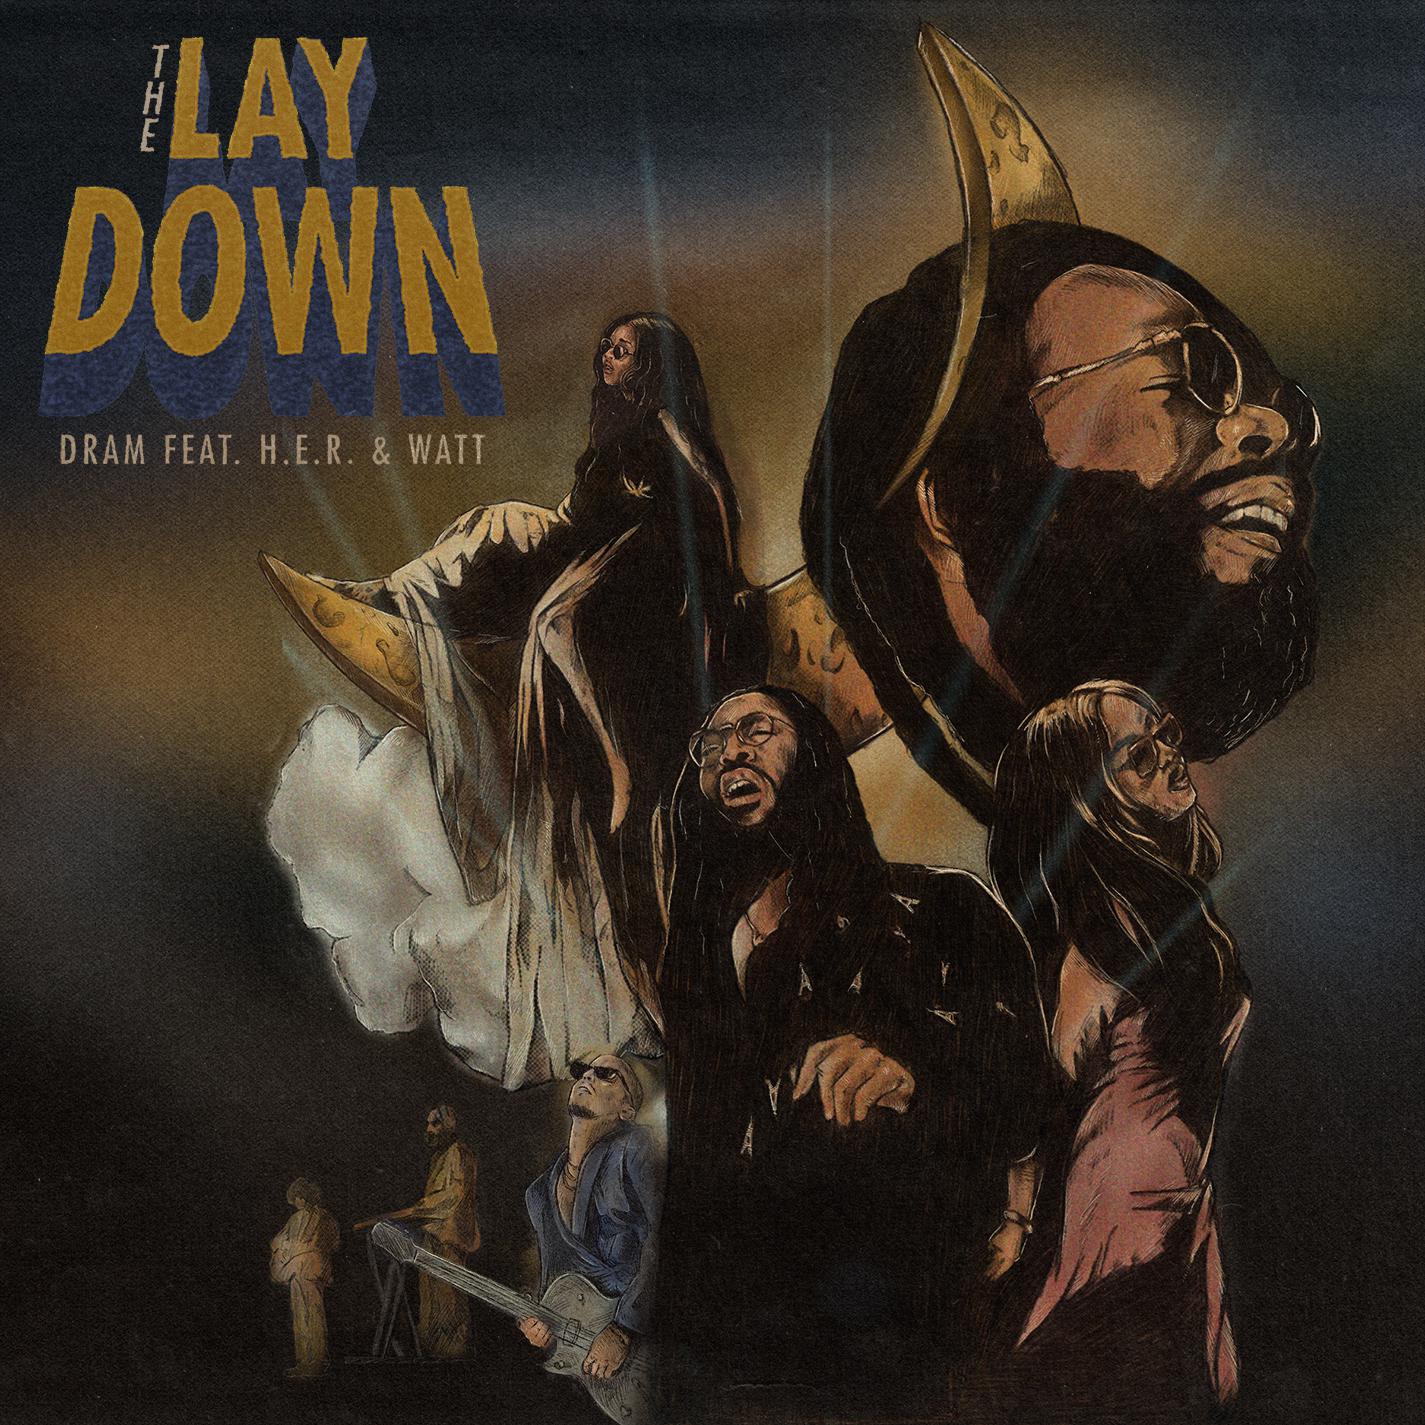 The Lay Down